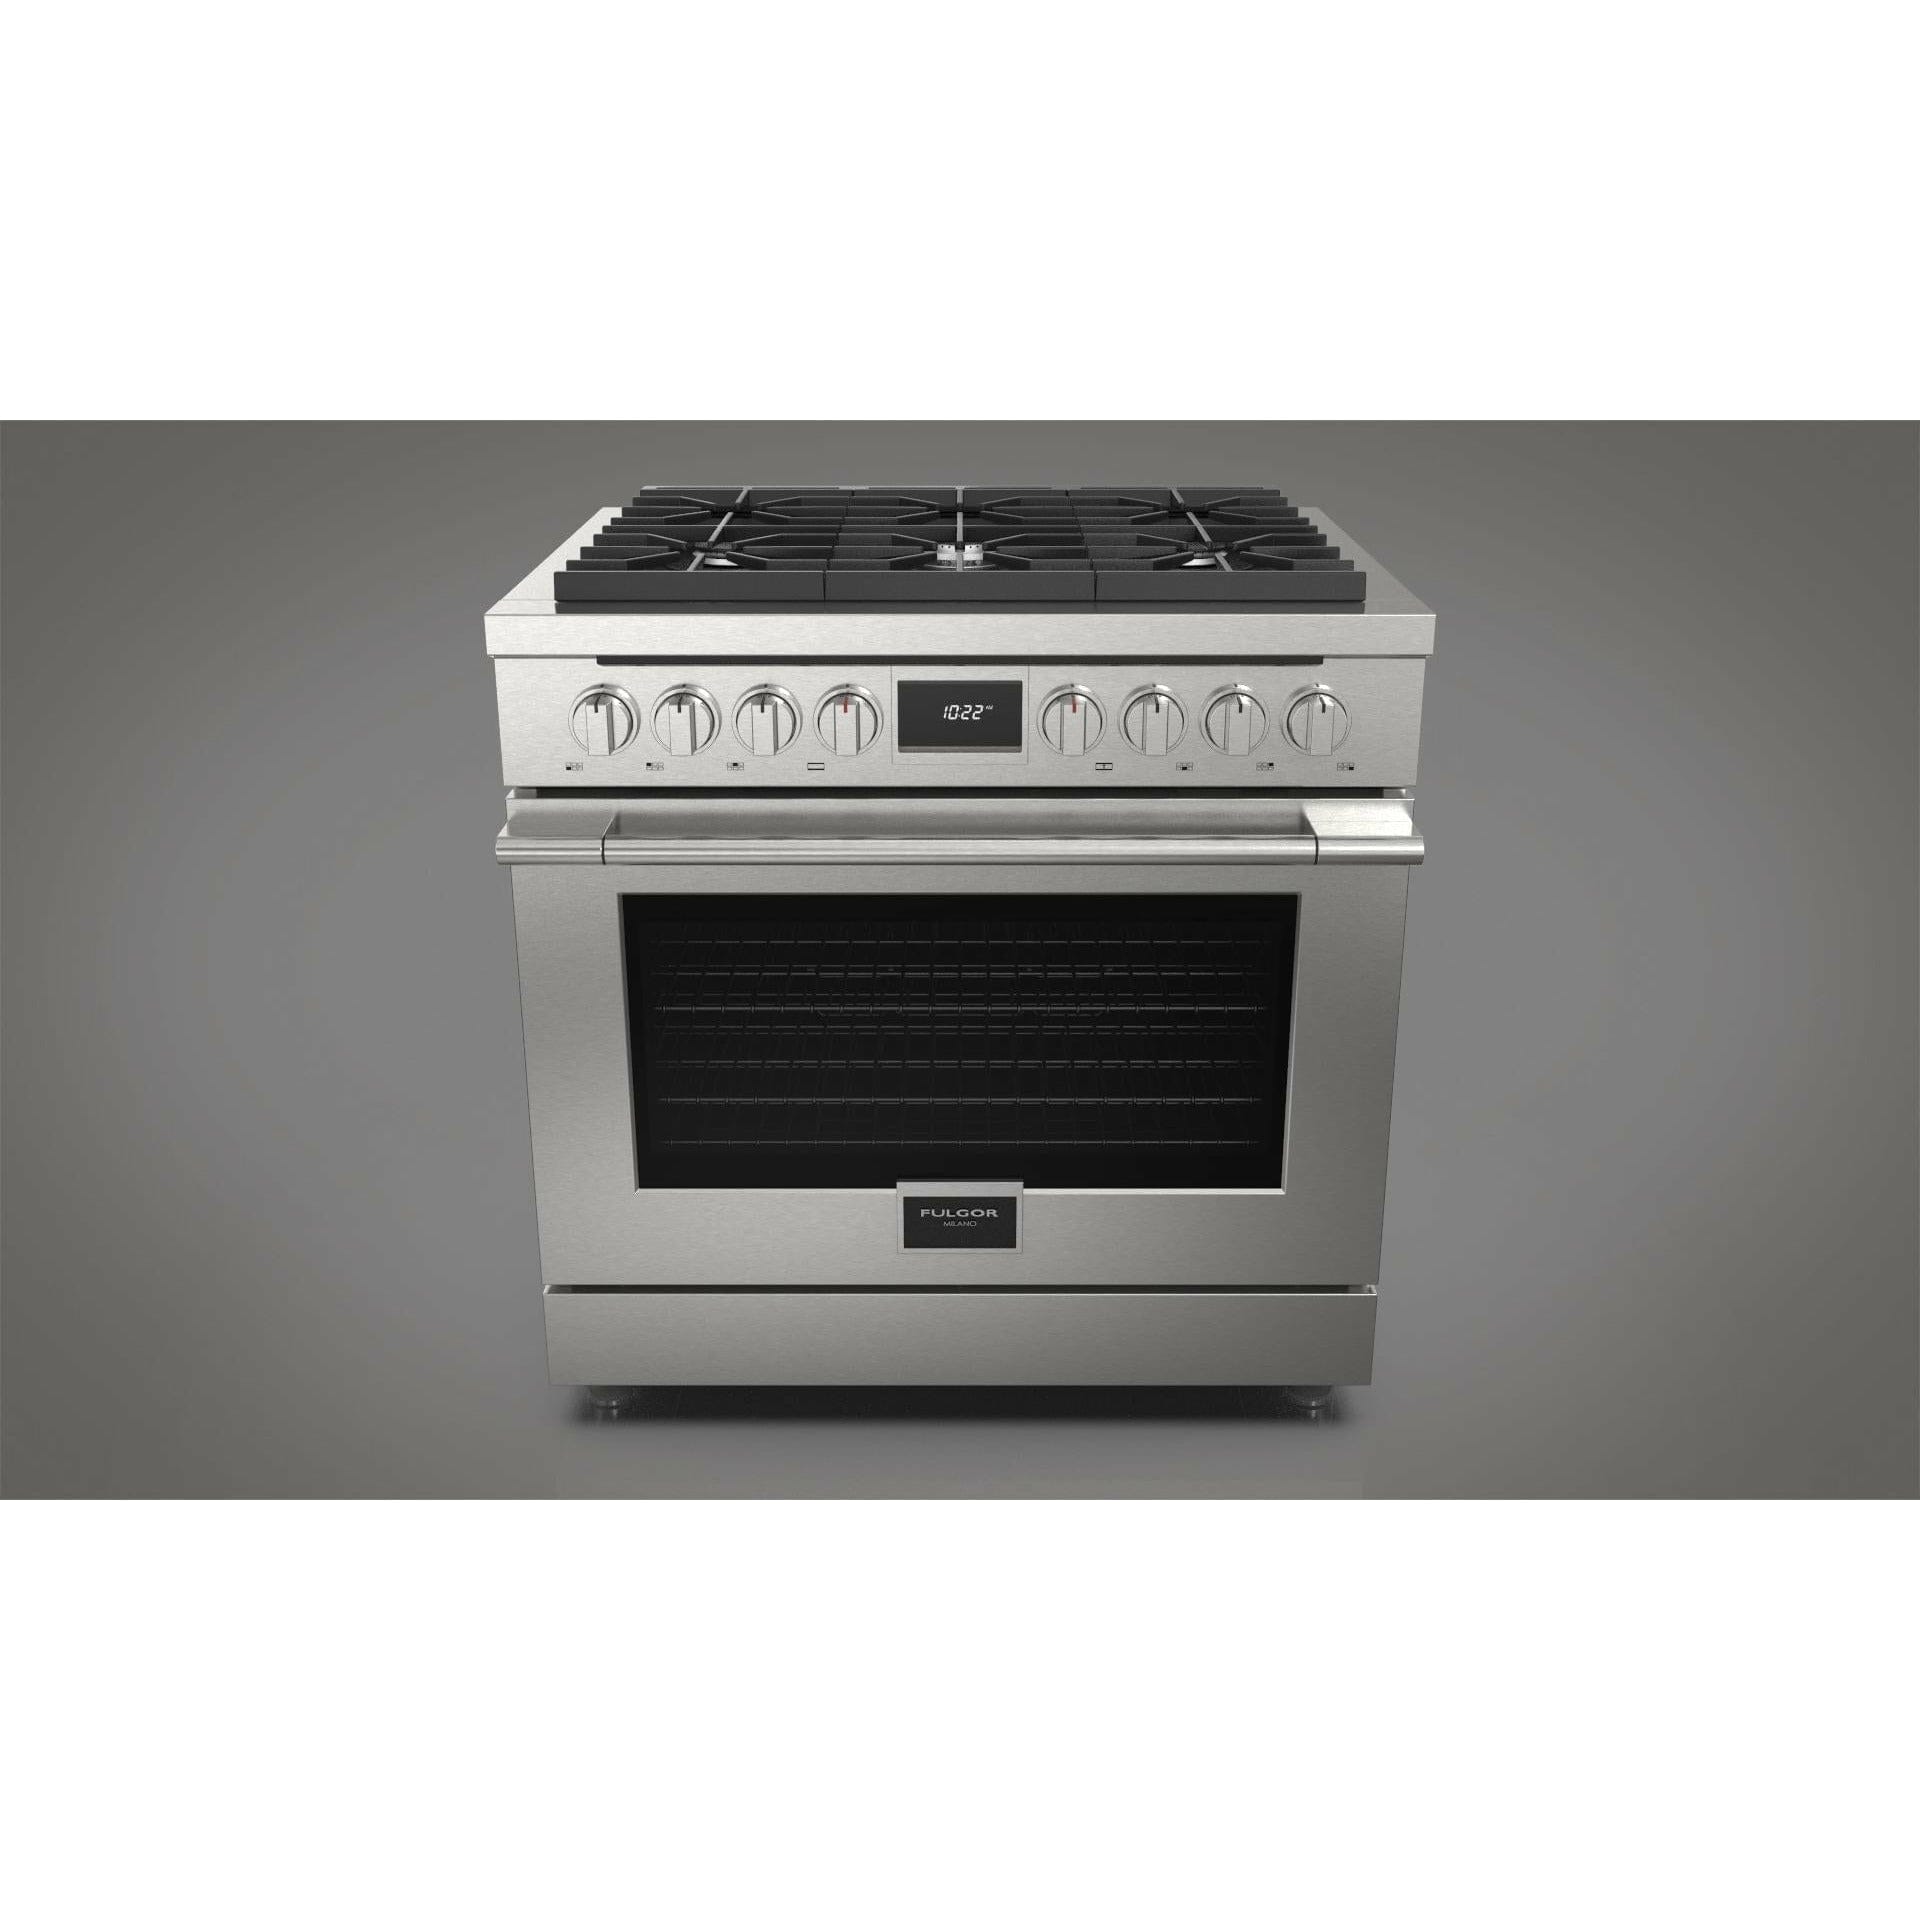 Fulgor Milano 36" Pro-Style Dual Fuel Range with 5.7 Cu. Ft. Capacity, Stainless Steel - F4PDF366S1 Ranges F4PDF366S1 Luxury Appliances Direct